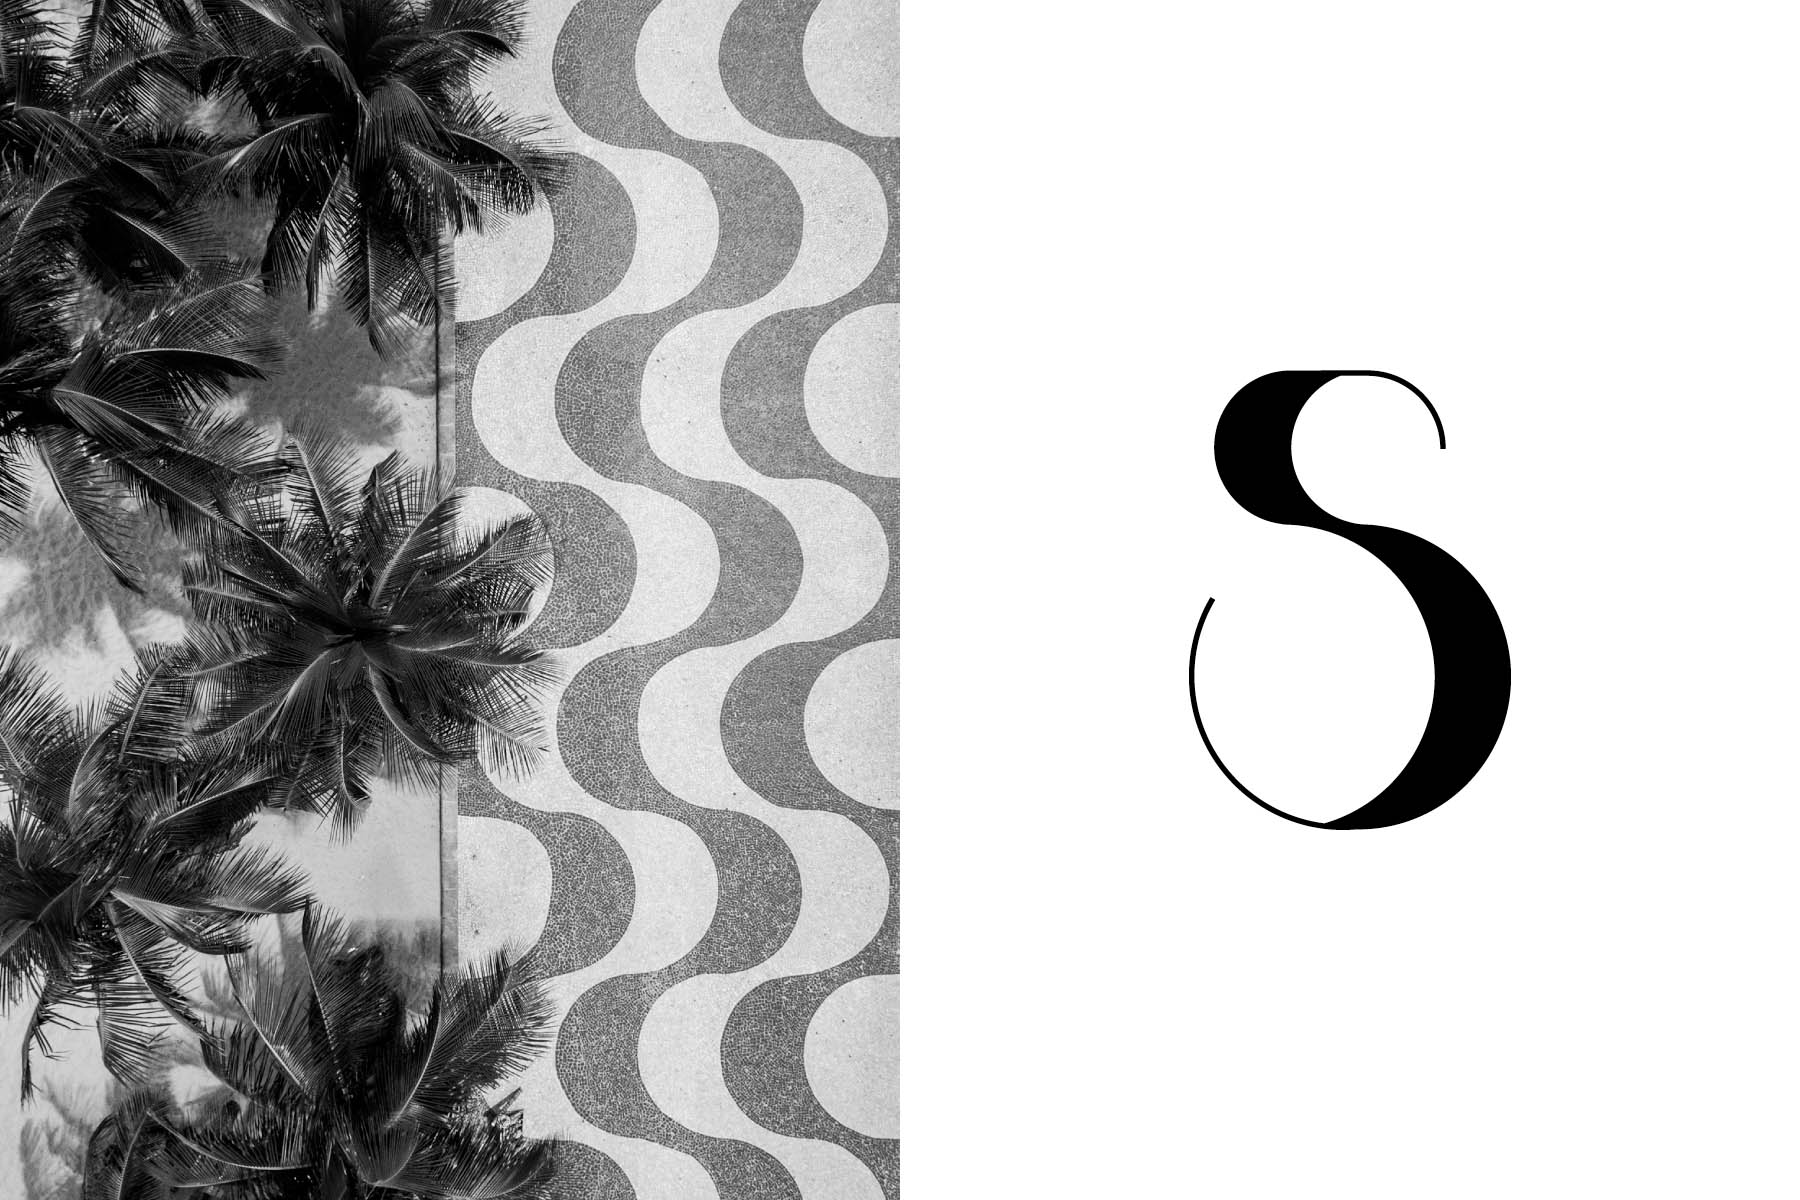 The starting point for the design was the letter S inspired by the famous Rio de Janeiro’s sidewalks (Calçadão) patterns